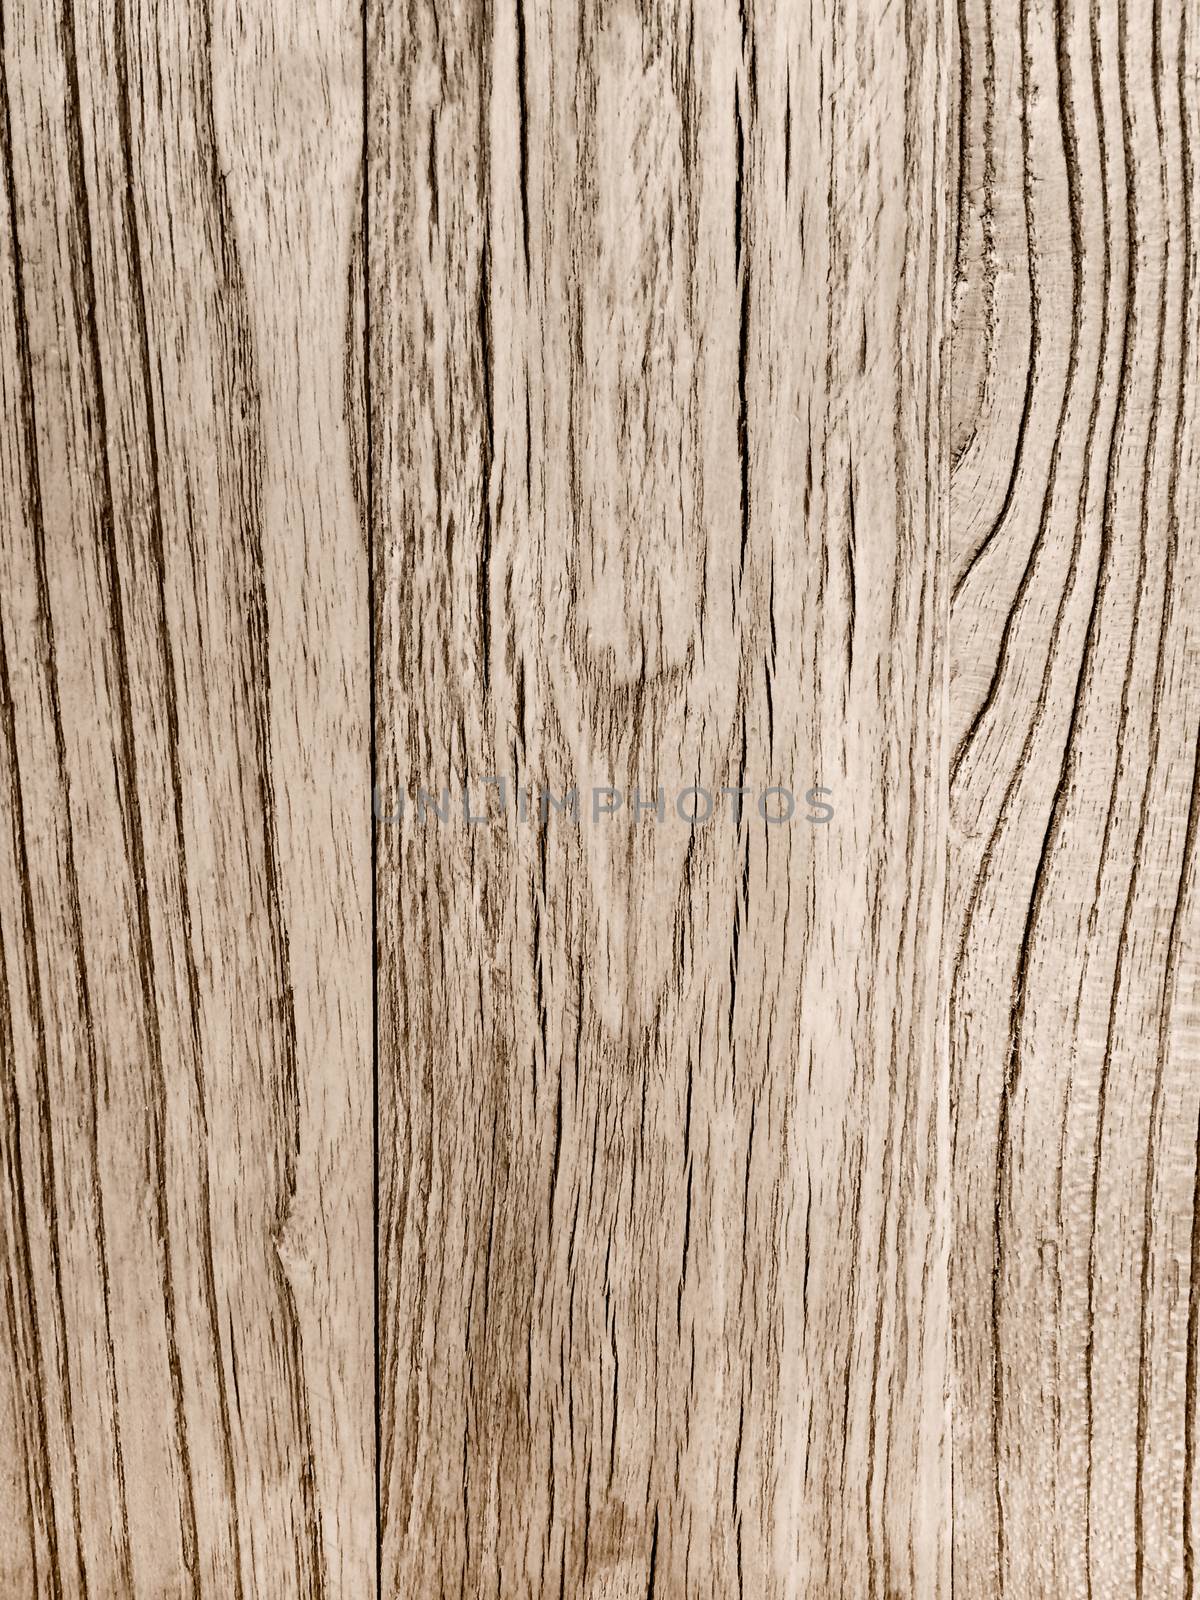 Old gray wood background. Abstract wooden texture.